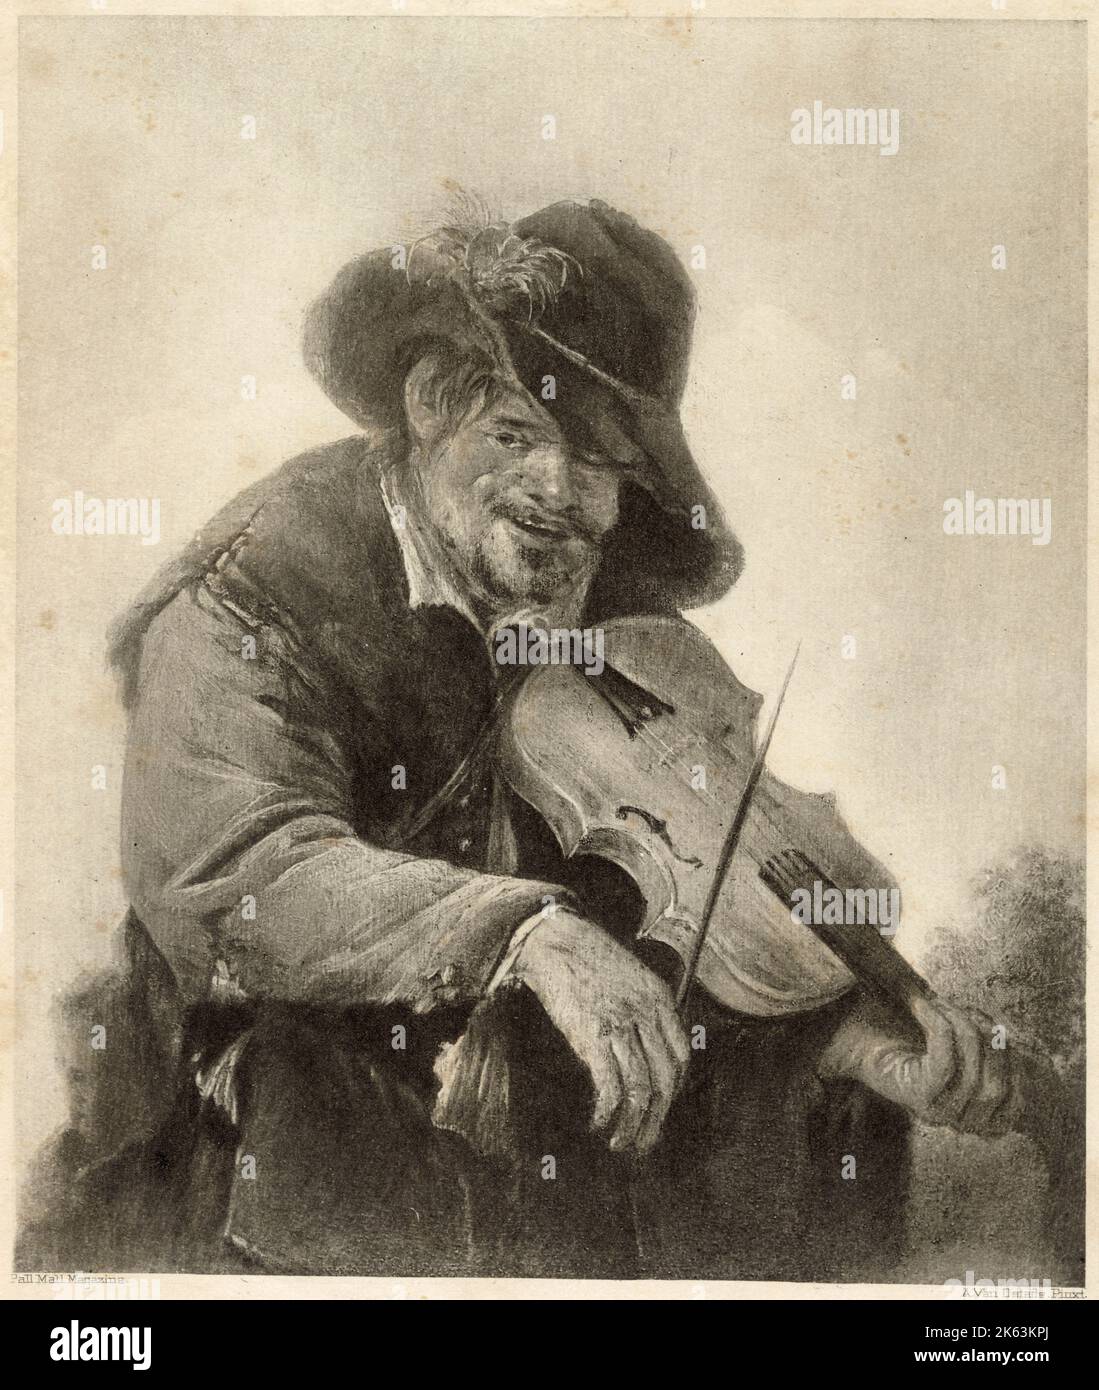 'The Itinerant Musician' - a Flemish fiddler. Stock Photo